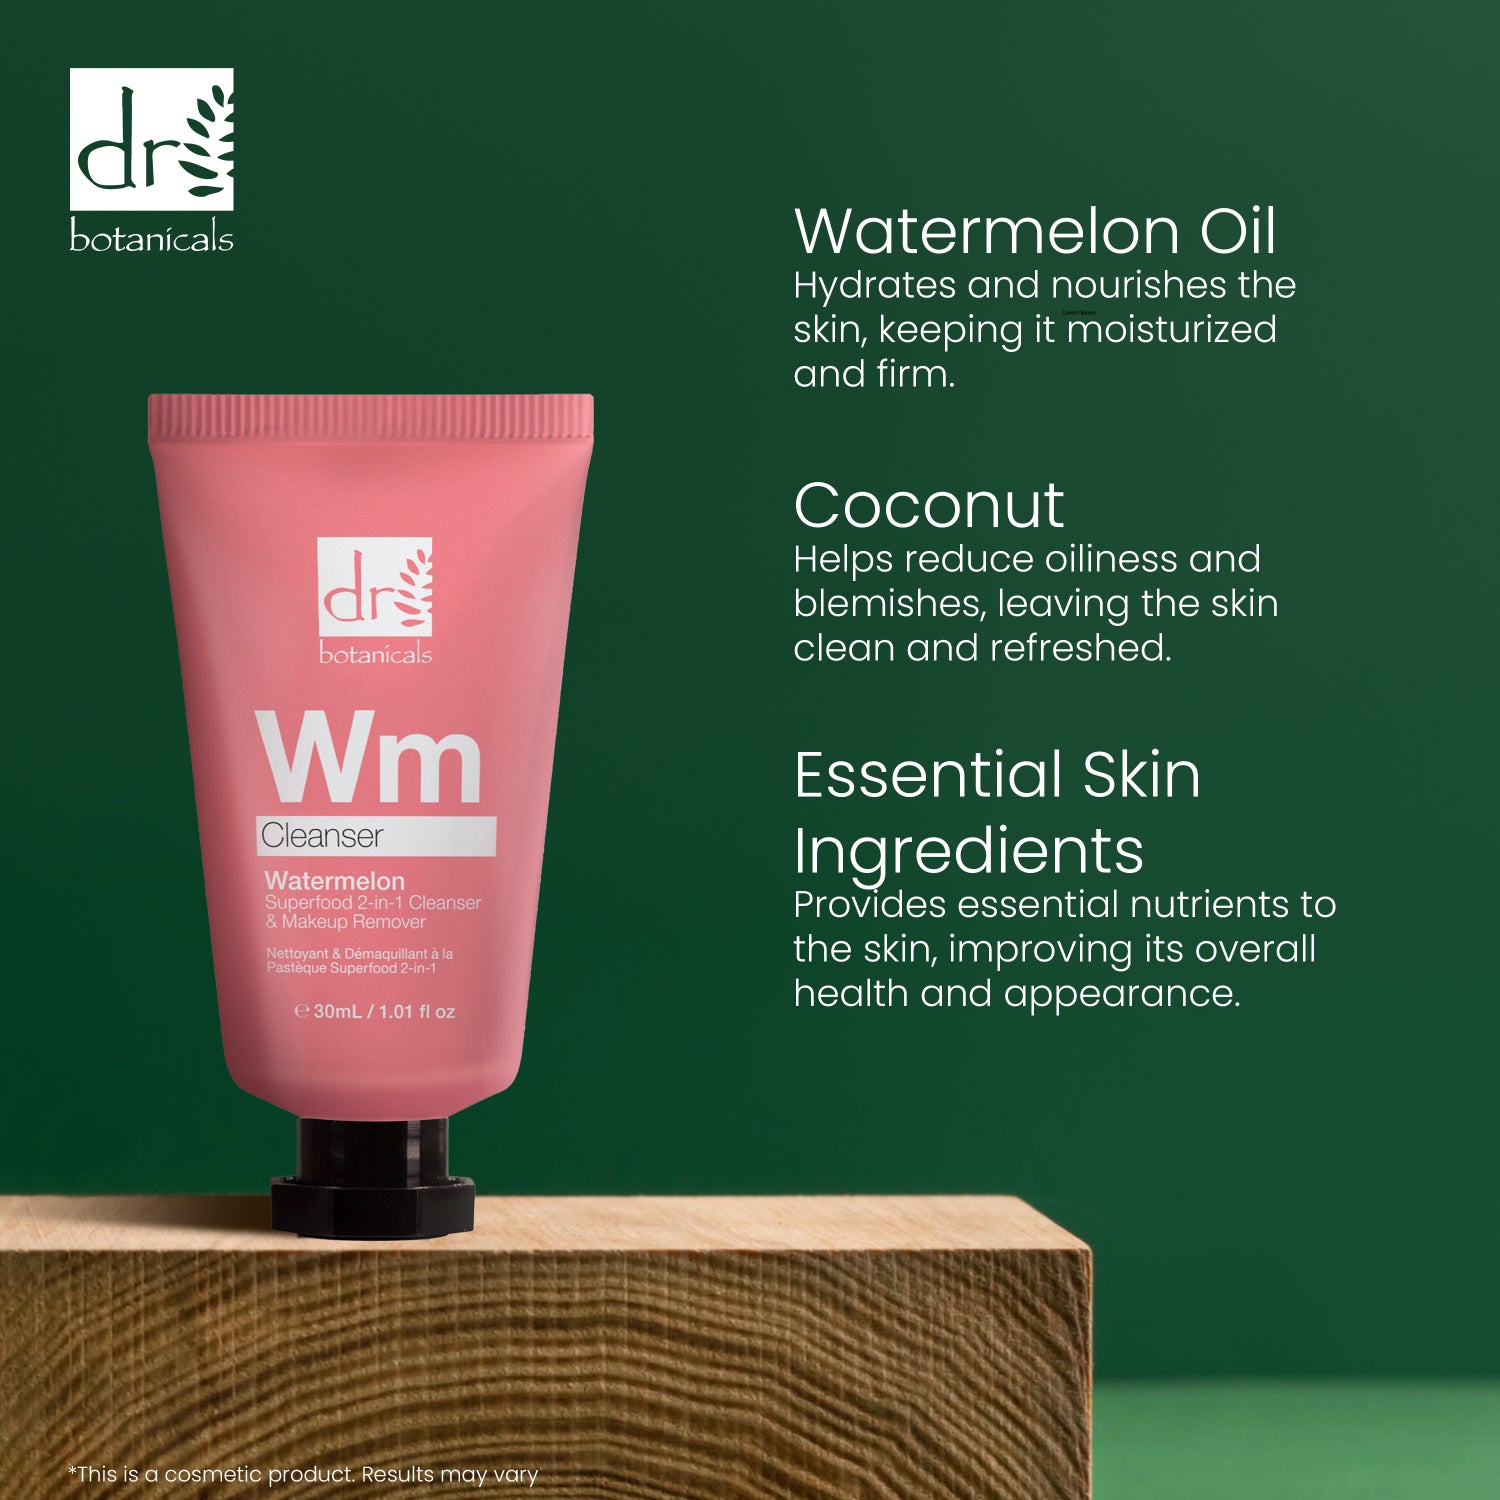 Watermelon Superfood 2-In-1 Cleanser & Makeup Remover 30ml